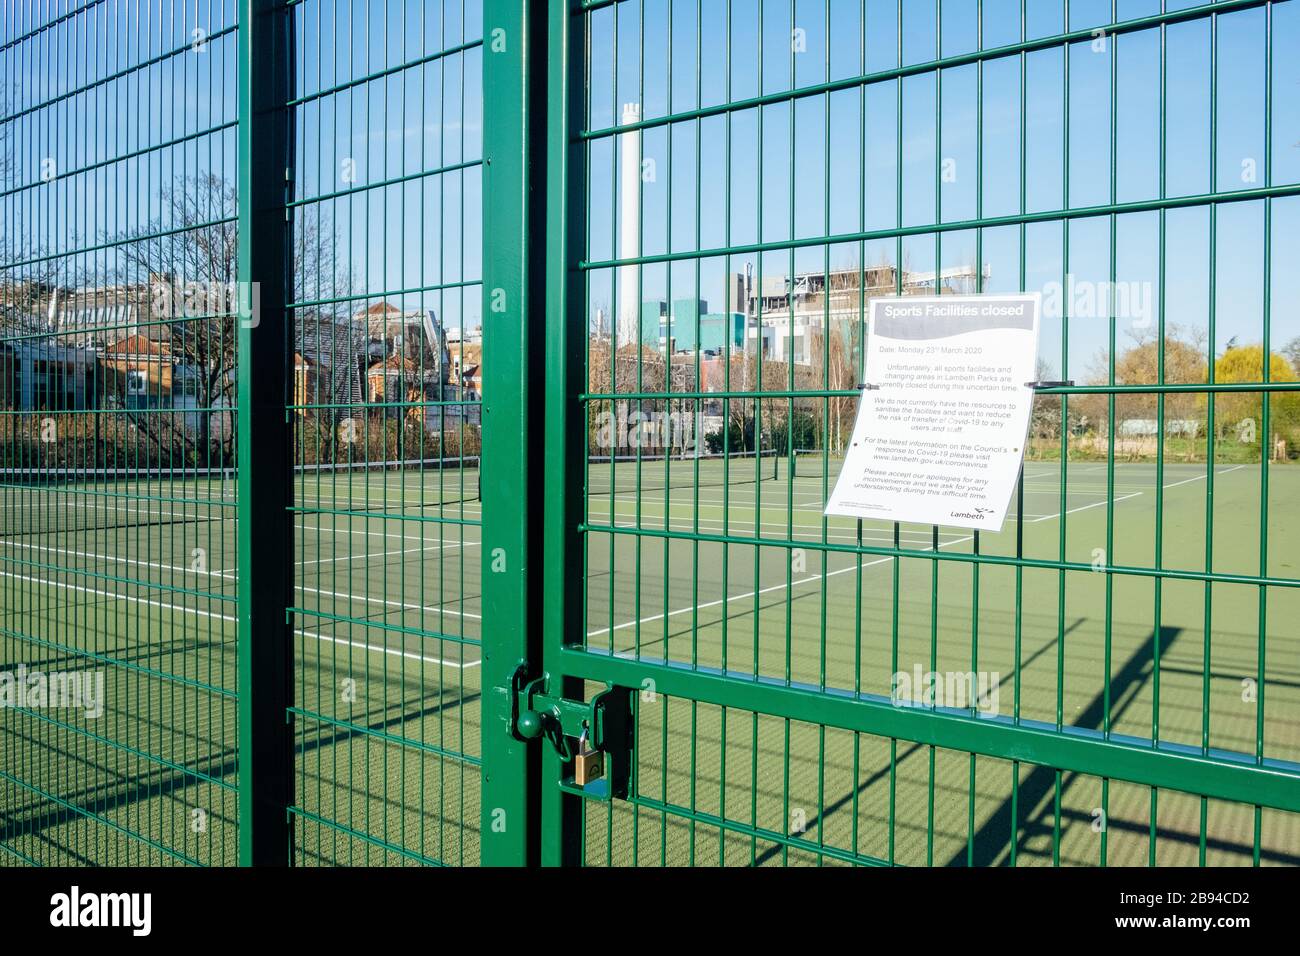 Ruskin Park, Camberwell, London, UK. 23rd March, 2020. Tennis courts with a view of King's College Hospital in the background are locked to prevent the spread of coronavirus. Lambeth Council have closed all sports facilities and playgrounds as they do not have the resources to sanitise the facilities sufficiently. Credit: Tom Leighton/Alamy Live News Stock Photo